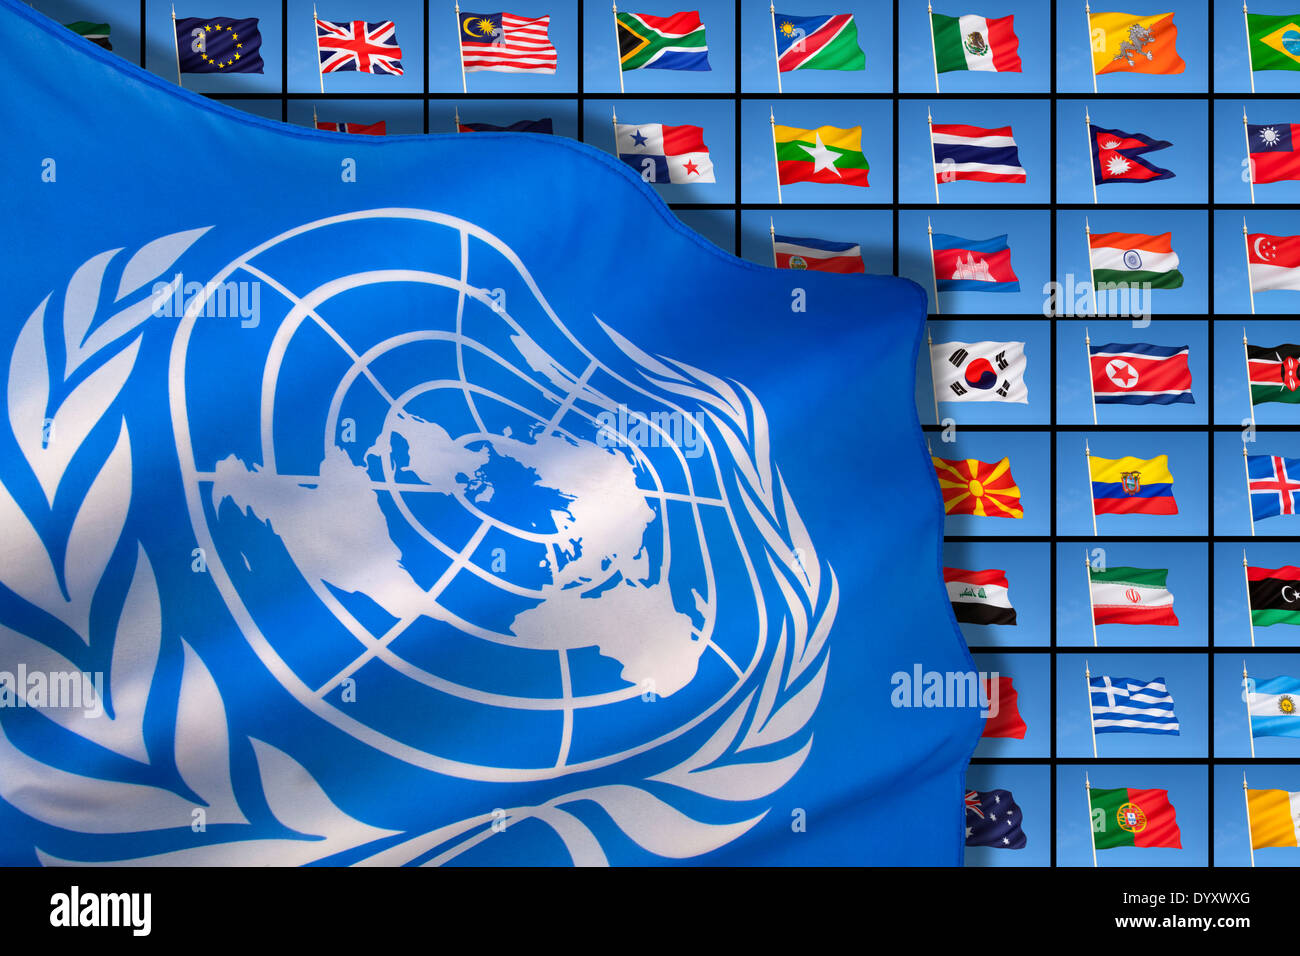 The flag of the United Nations on a background of international flags Stock Photo